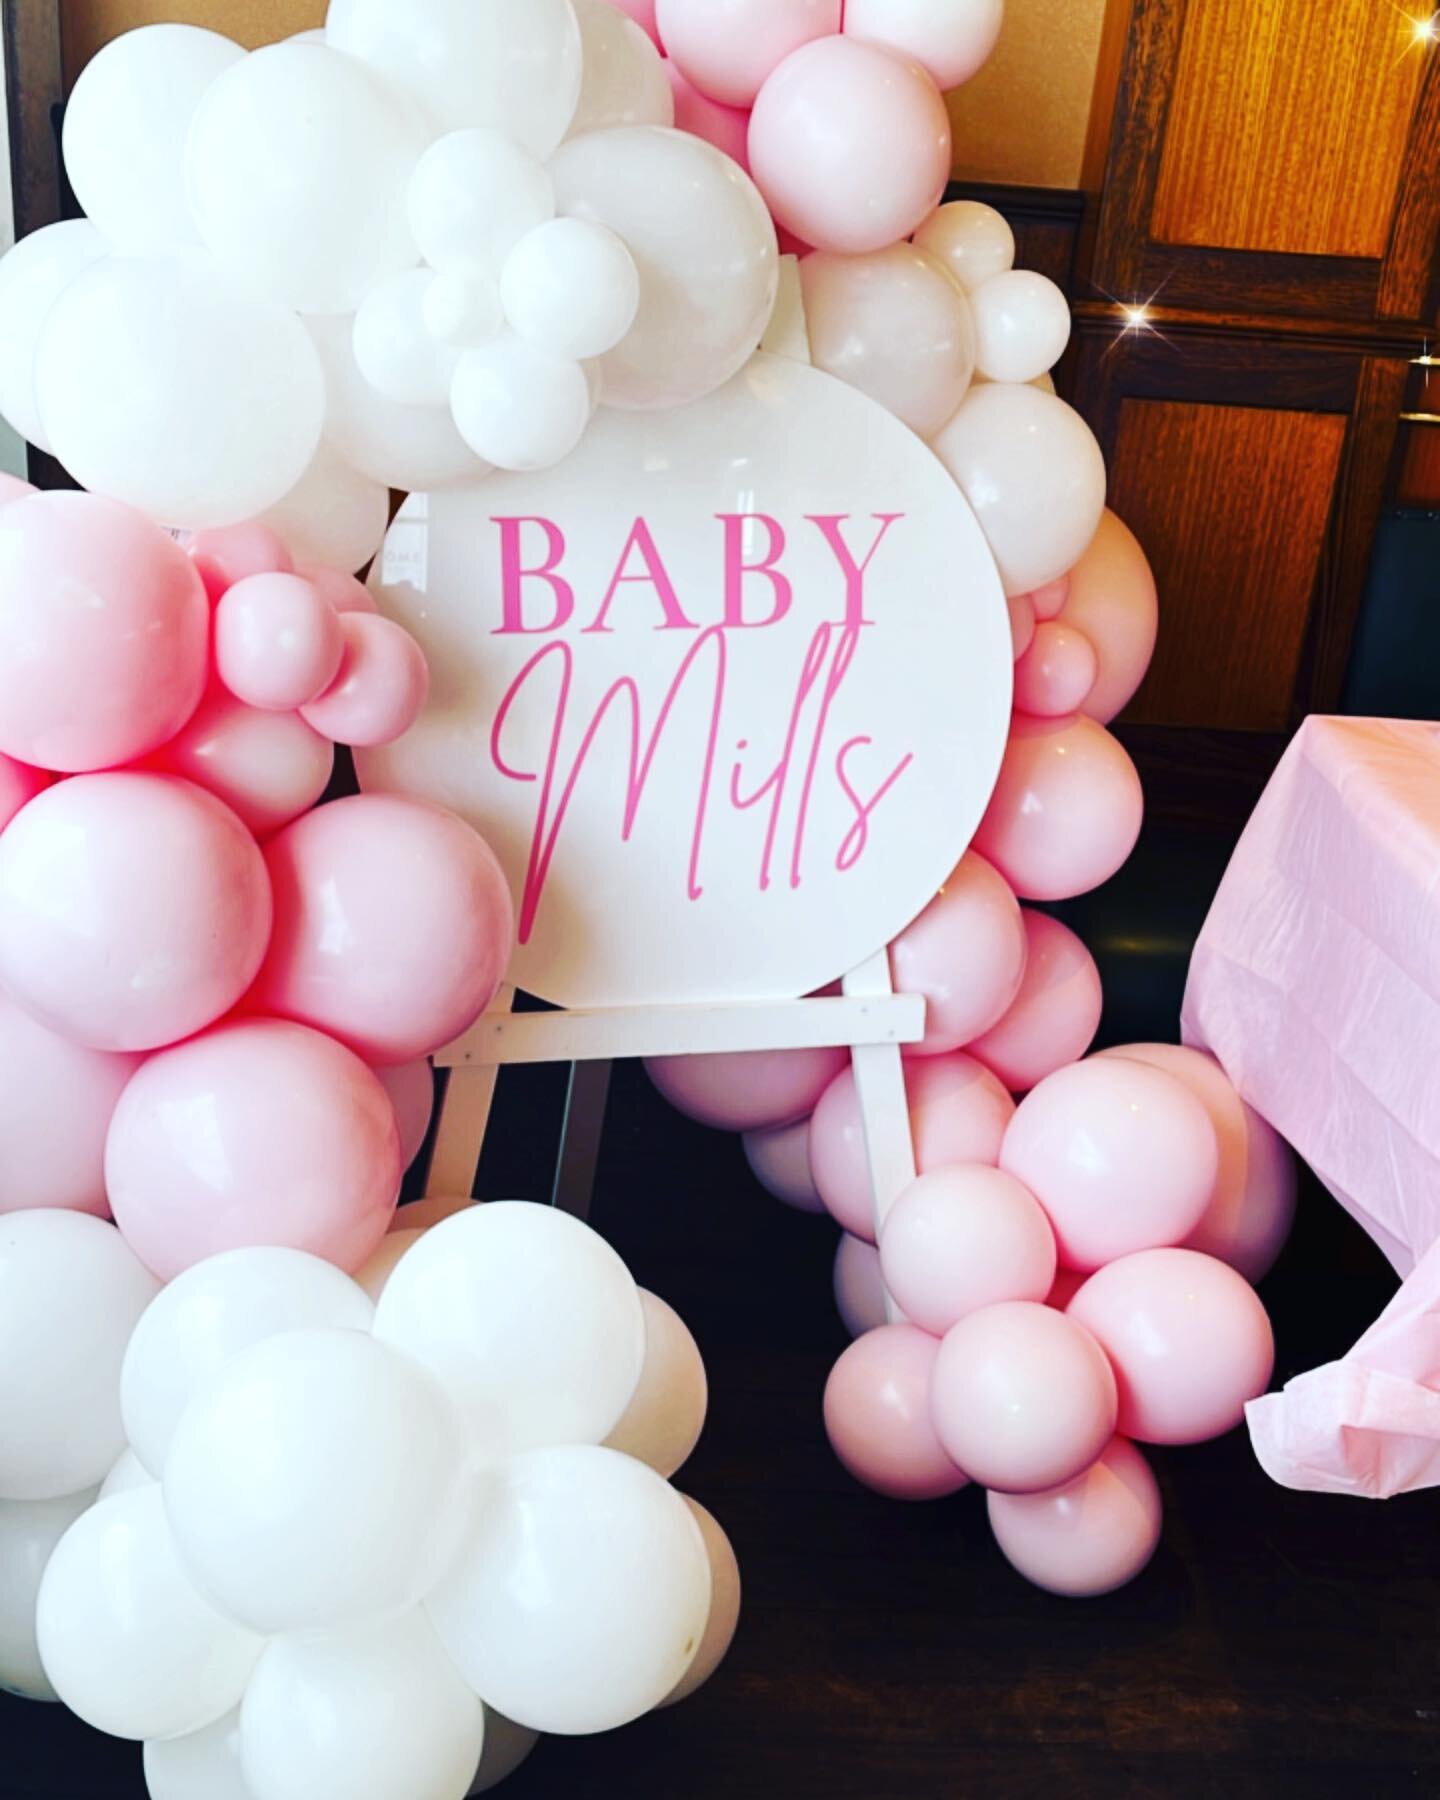 🌸Little Miss Mills 💕

Baby shower celebrations done right ✔️